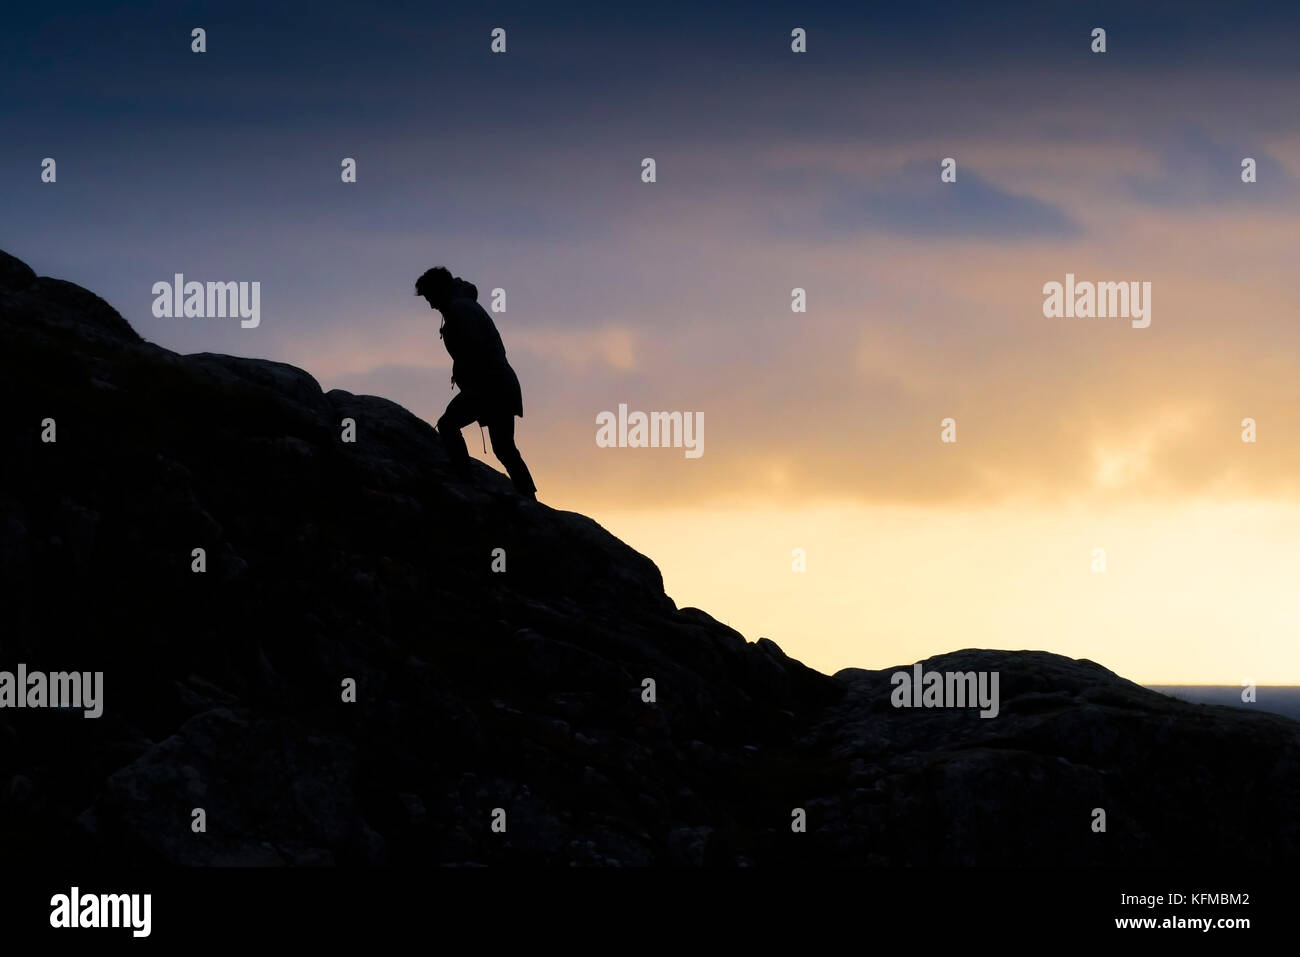 Silhouette - a solitary man silhouetted against evening light as he climbs a hill. Stock Photo